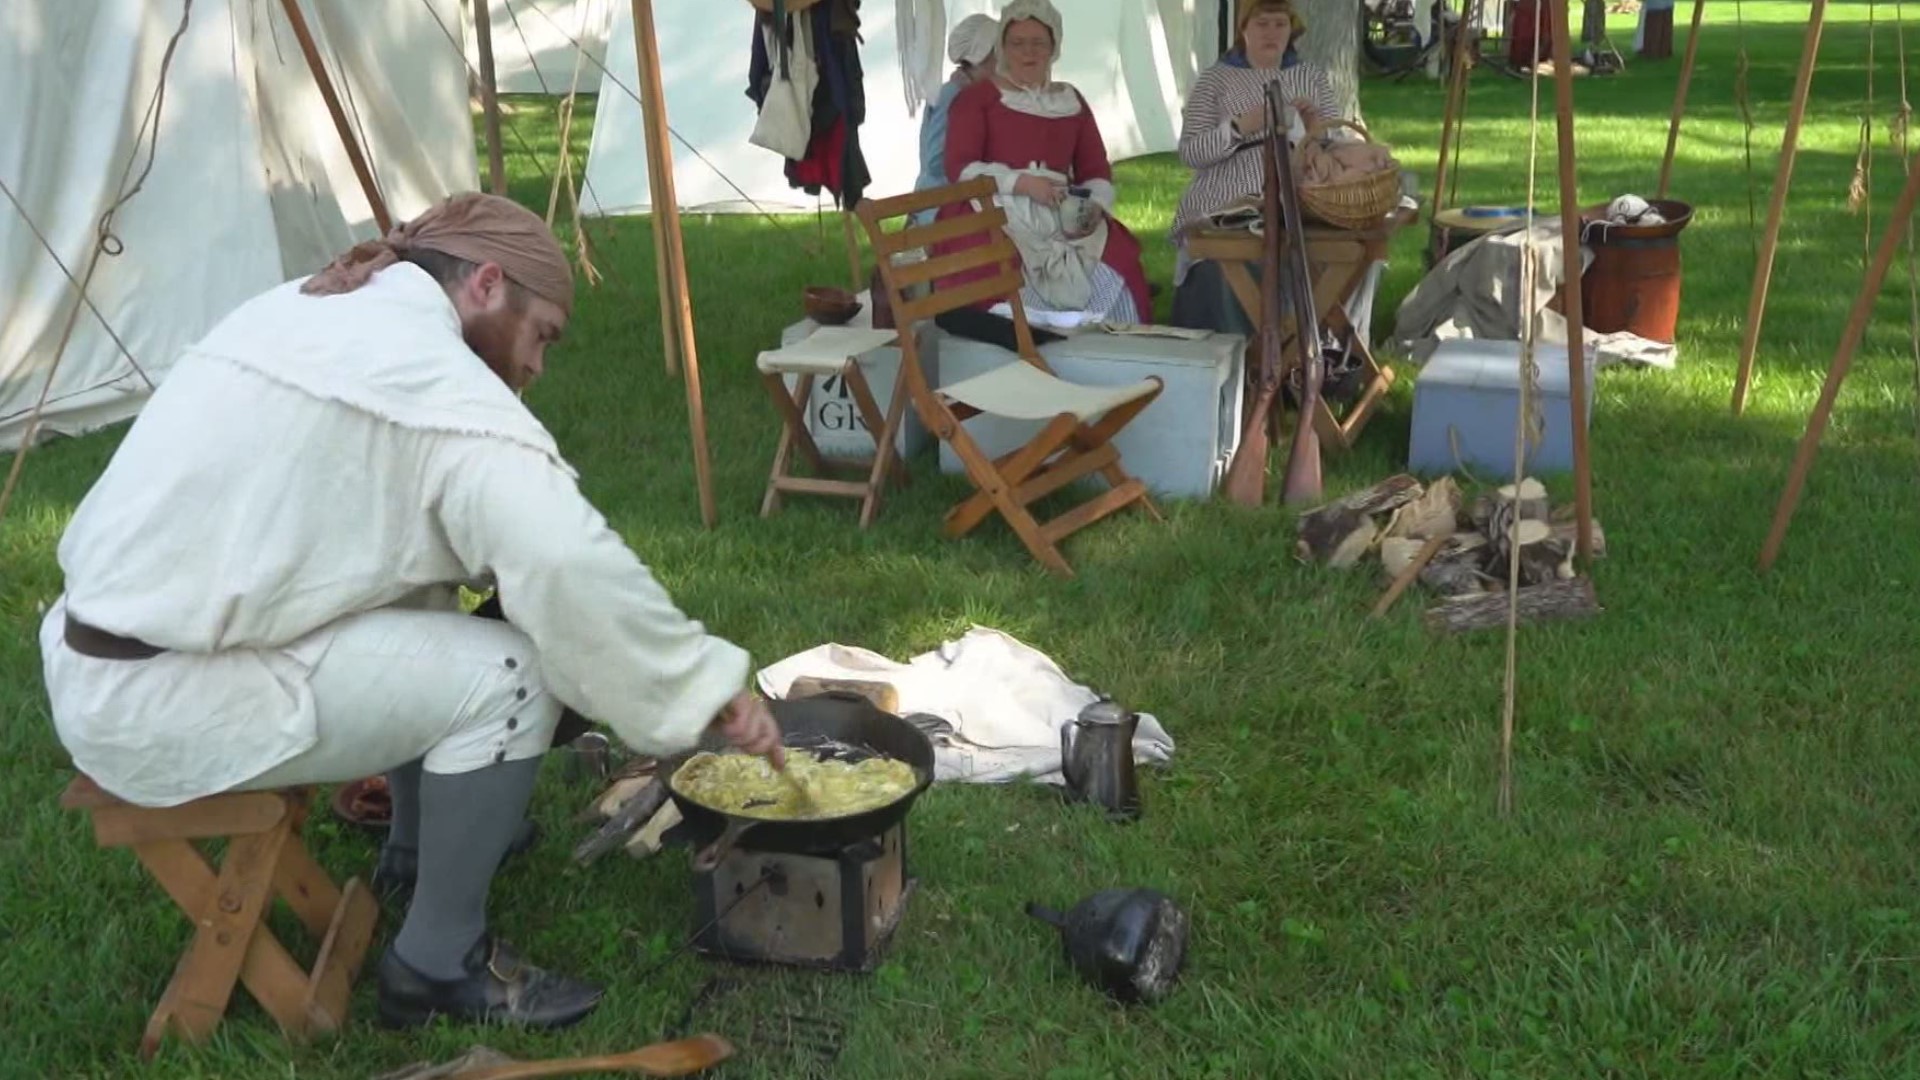 The two-day event is an 18th-century reenactment that starts with the Indiana War and ends with the American Revolution.